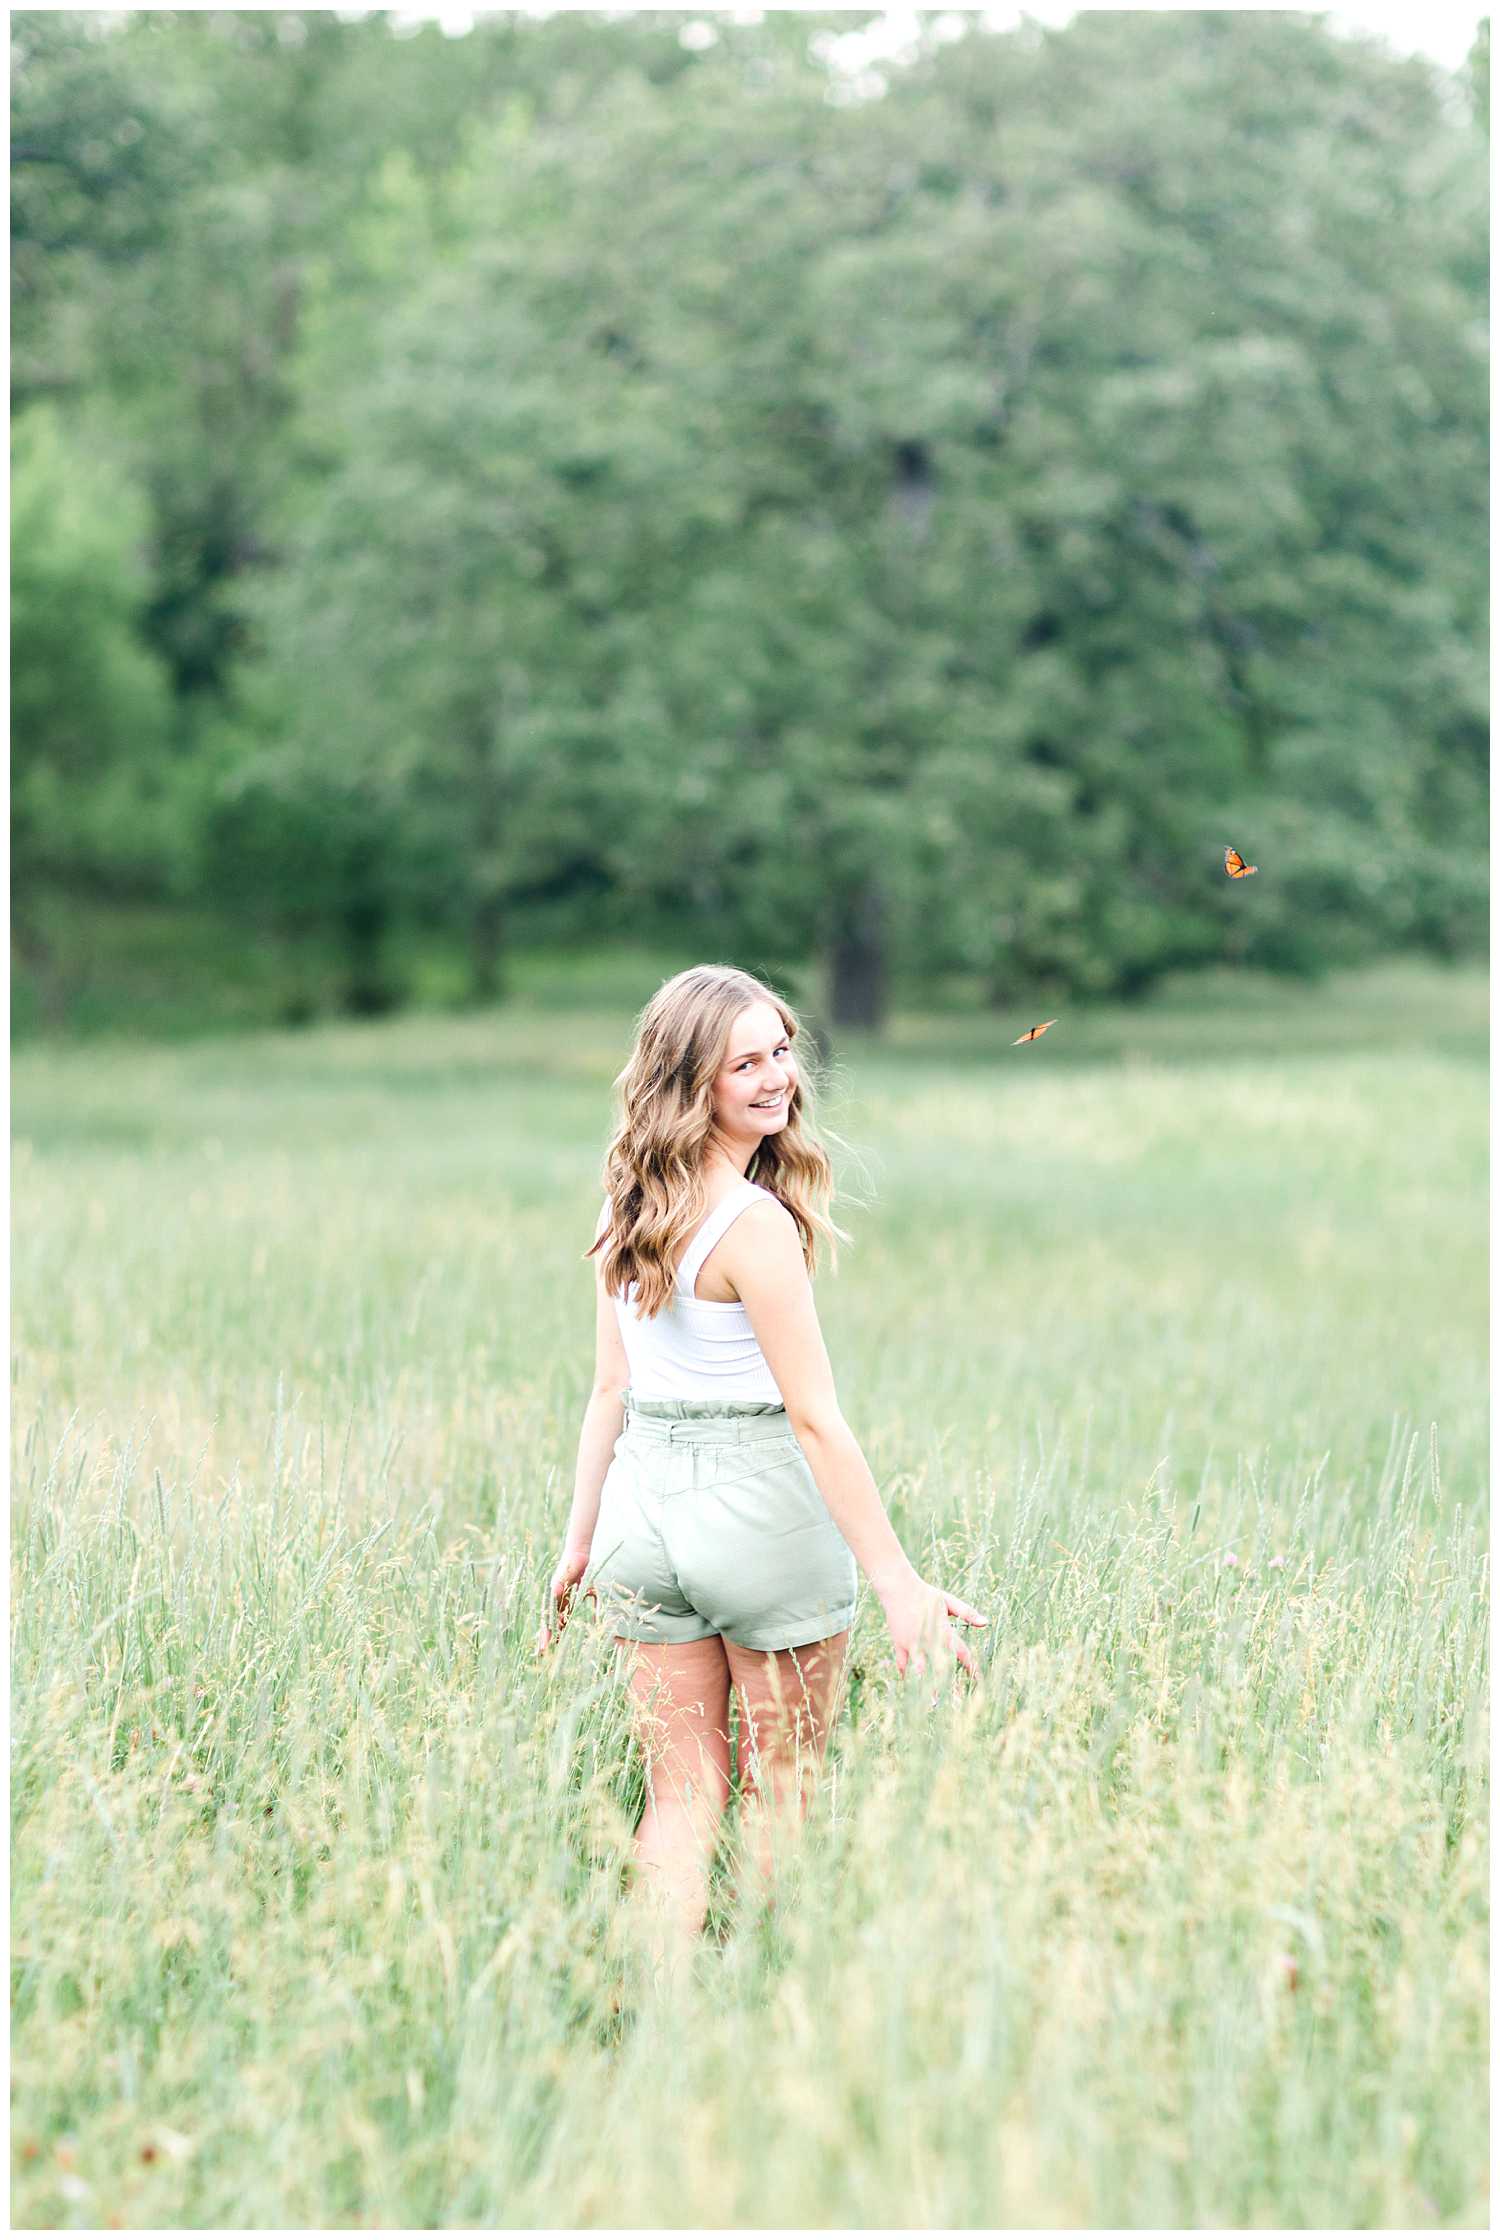 Senior Taylor walking away in a grassy field with butterflies flying around her | CB Studio